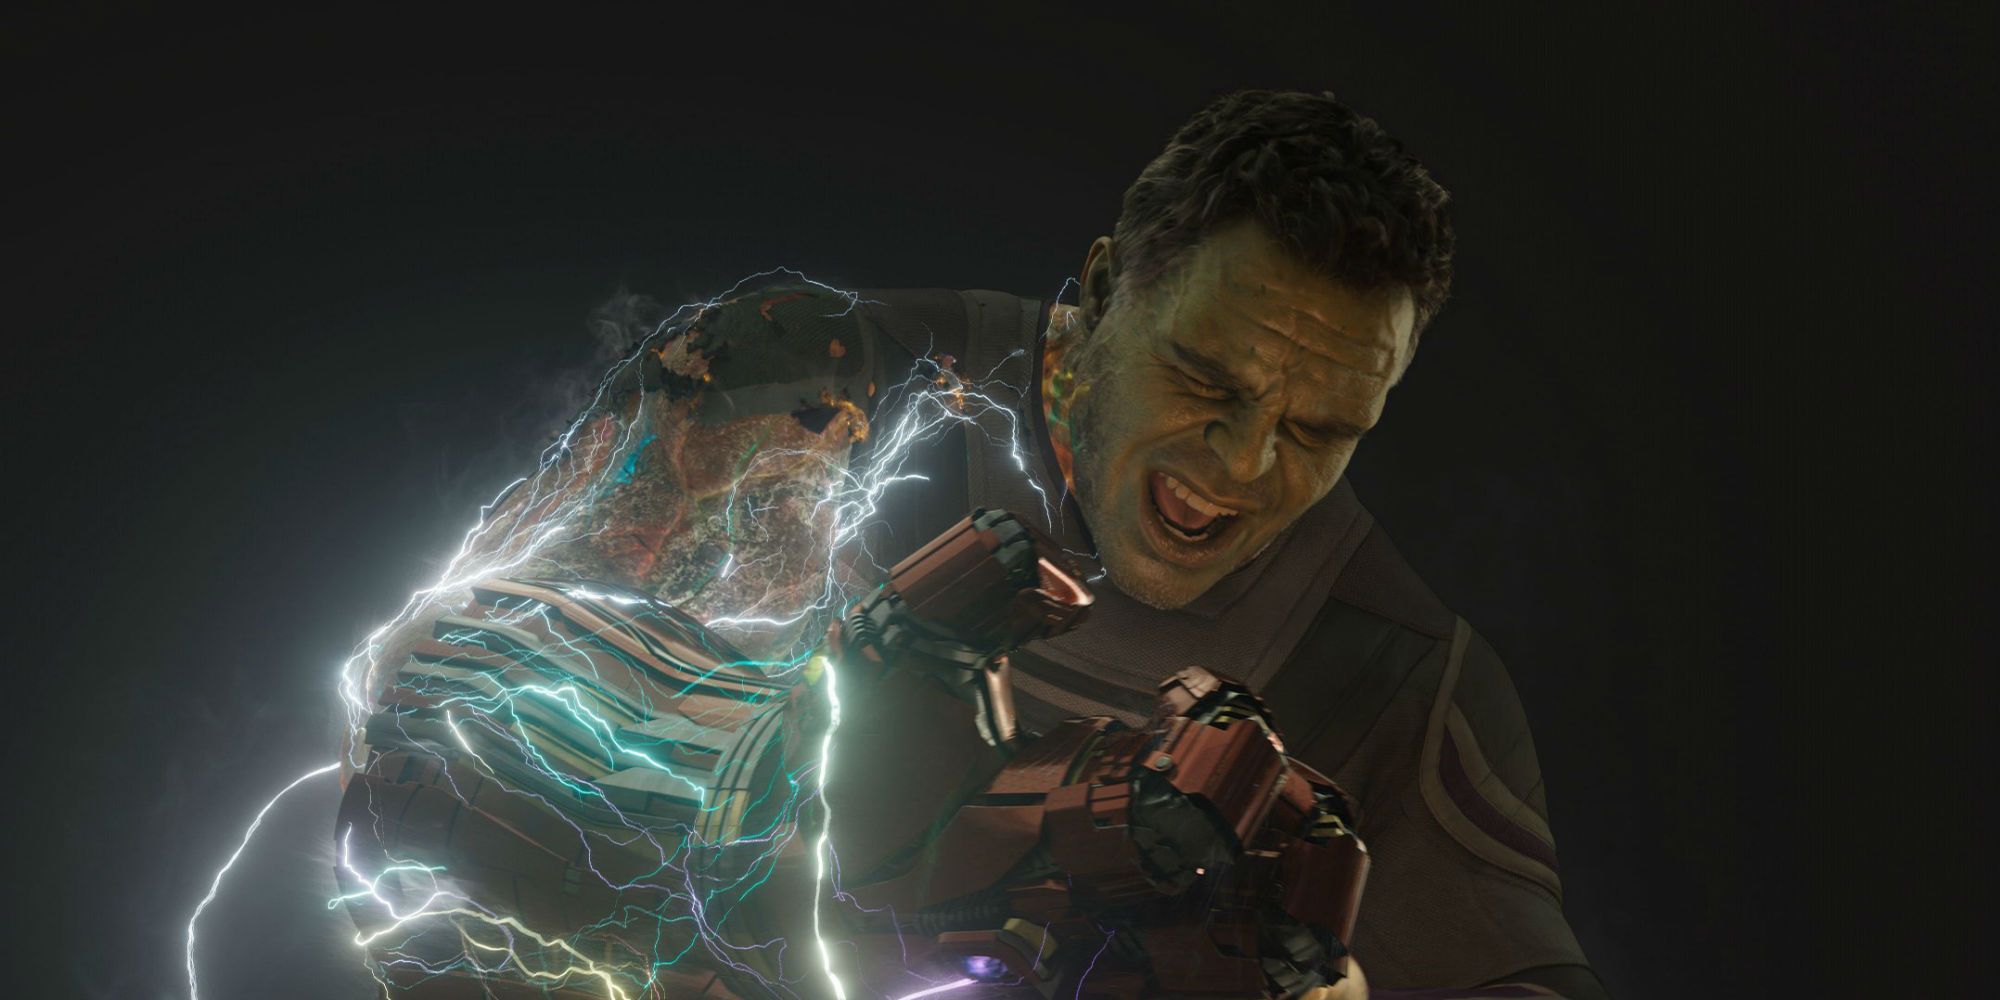 An image of the Hulk using the Infinity Gauntlet in Avengers: Endgame